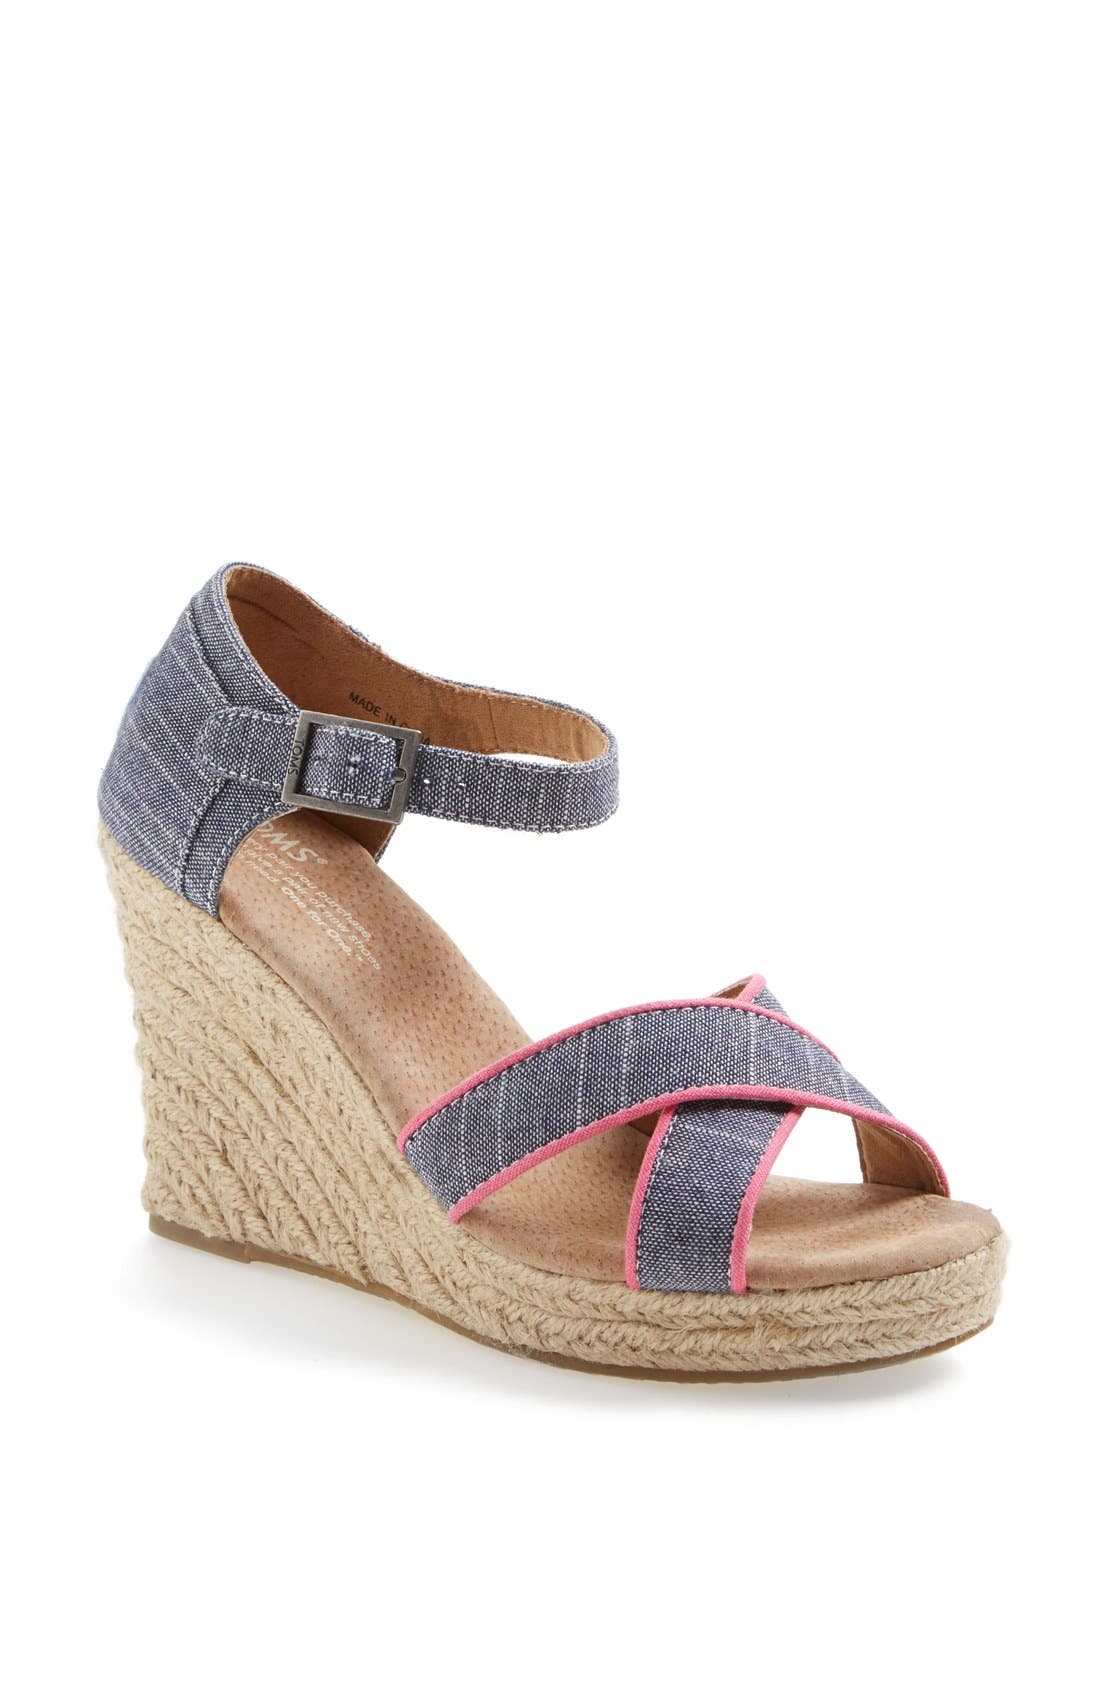 toms chambray wedge